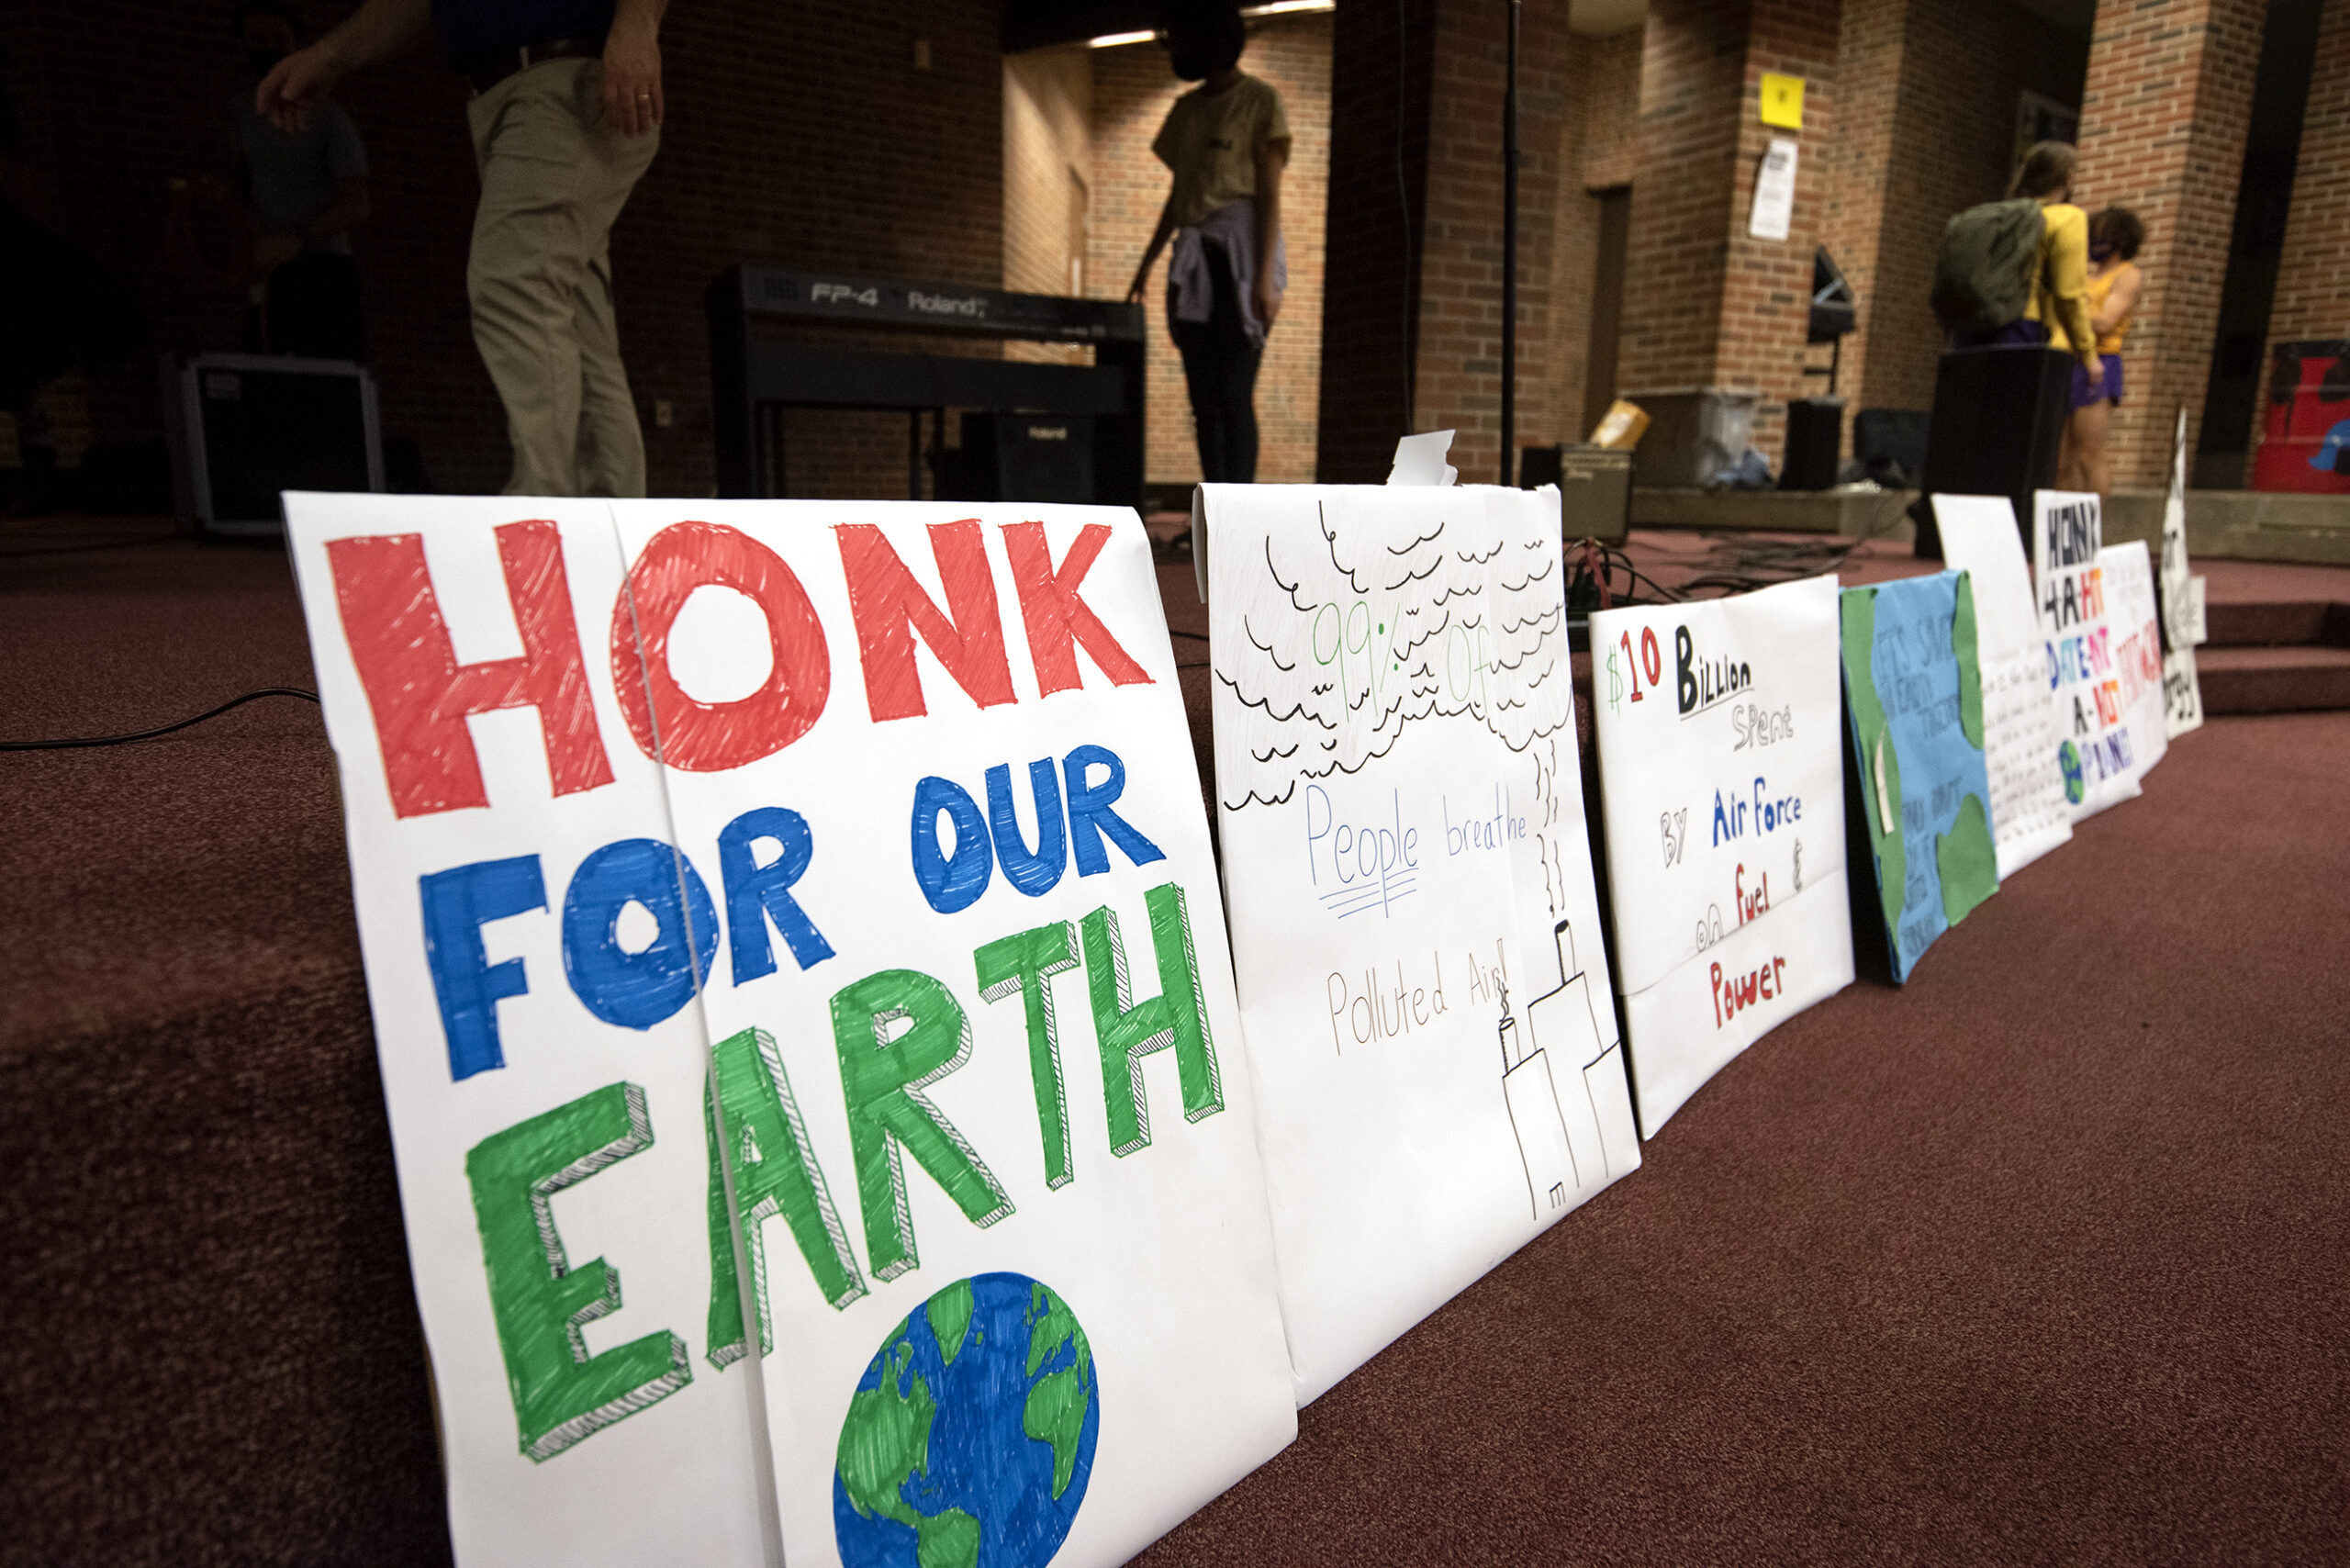 A sign that says "Honk for our Earth" is proper up against a stage.